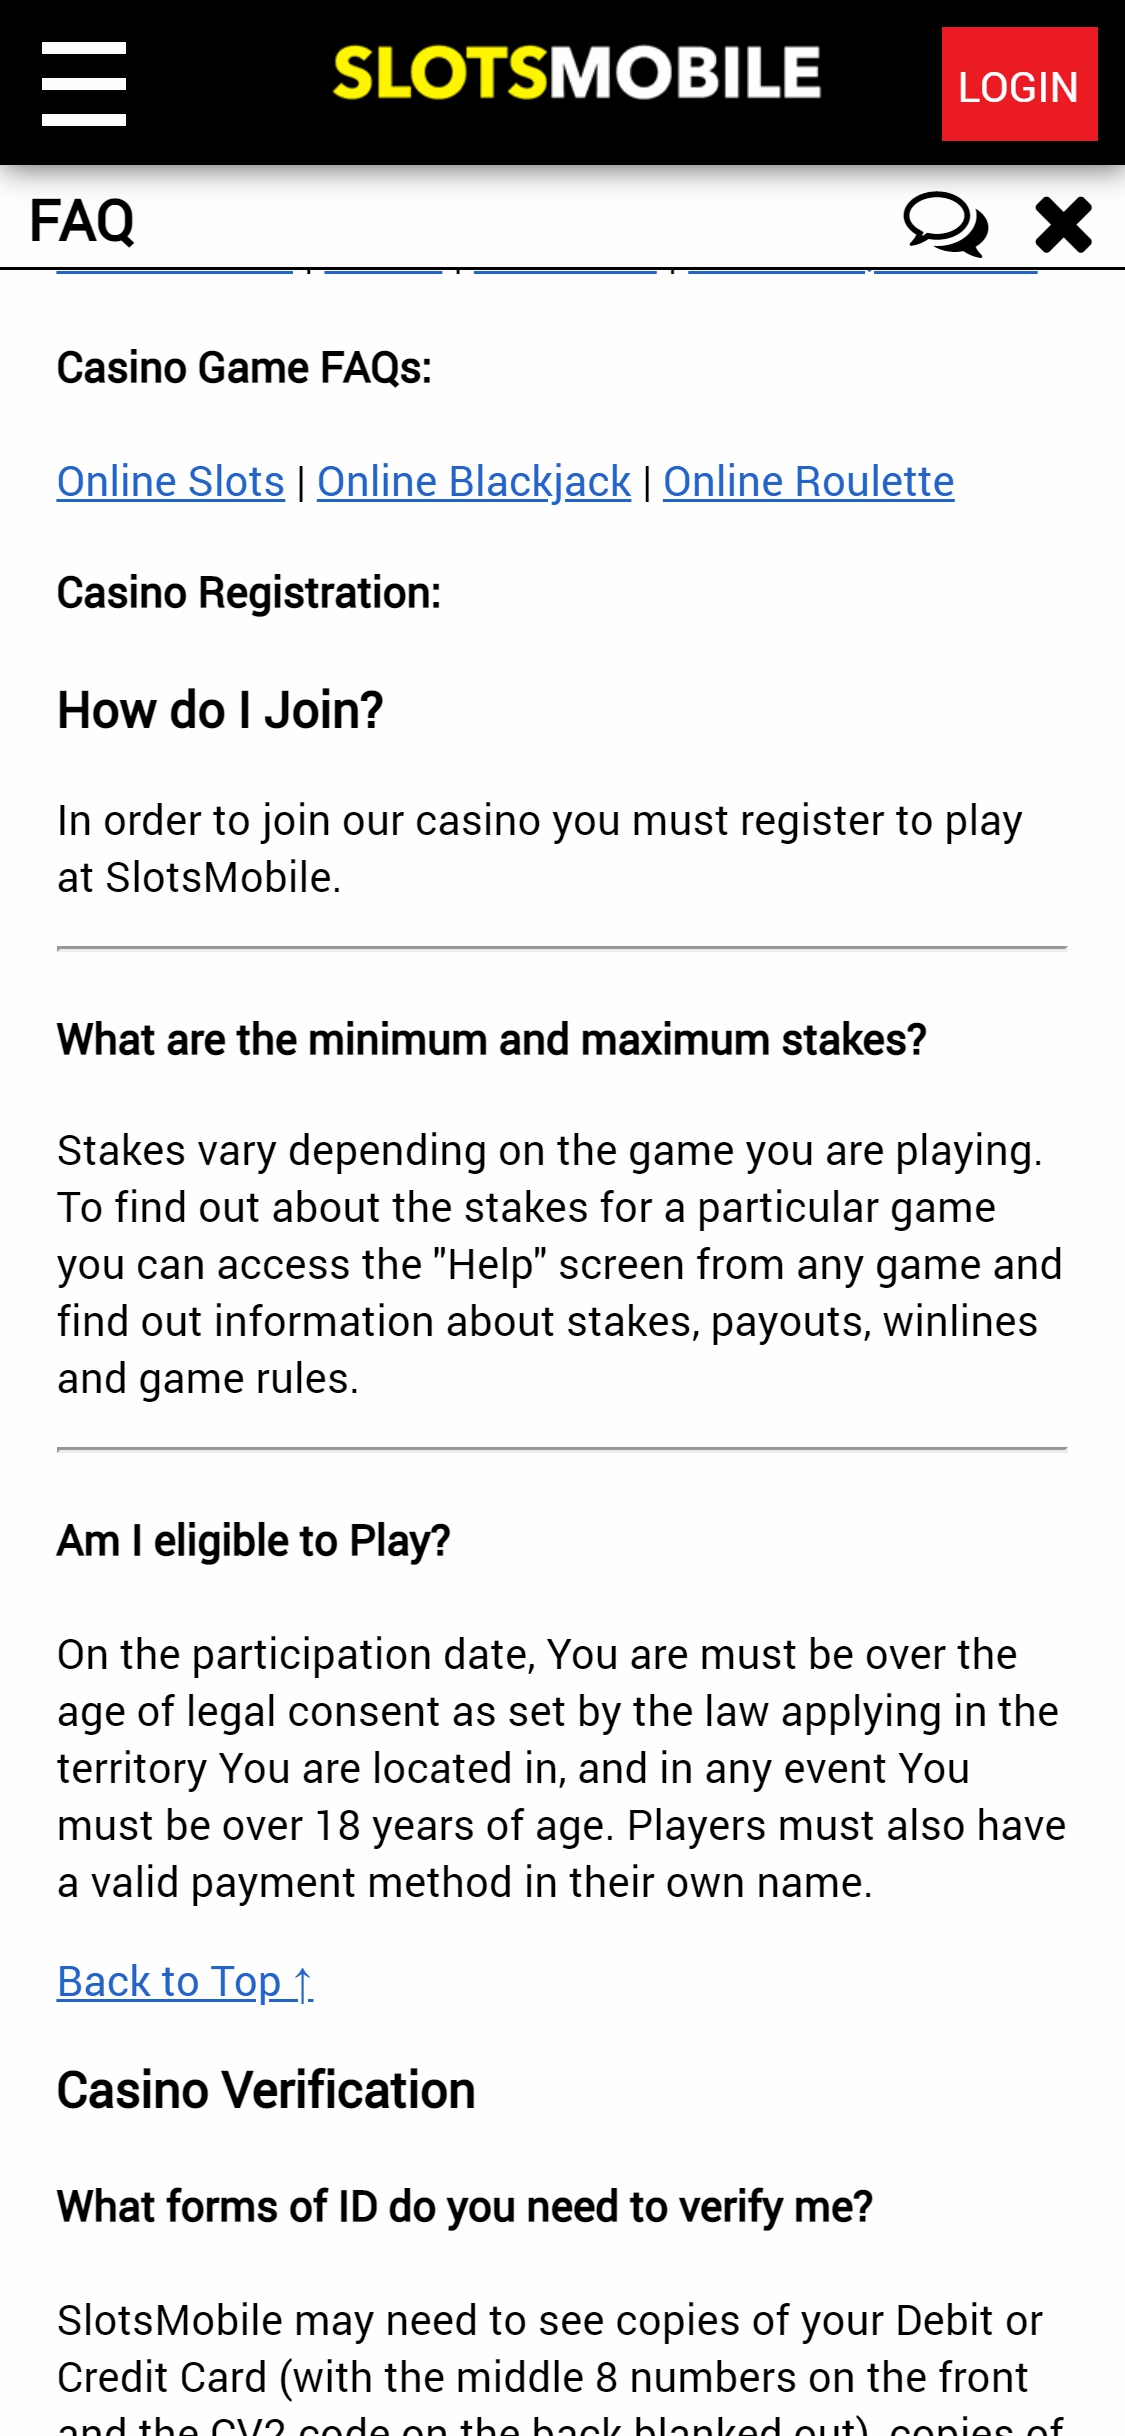 Slots Mobile Casino Mobile Support Review